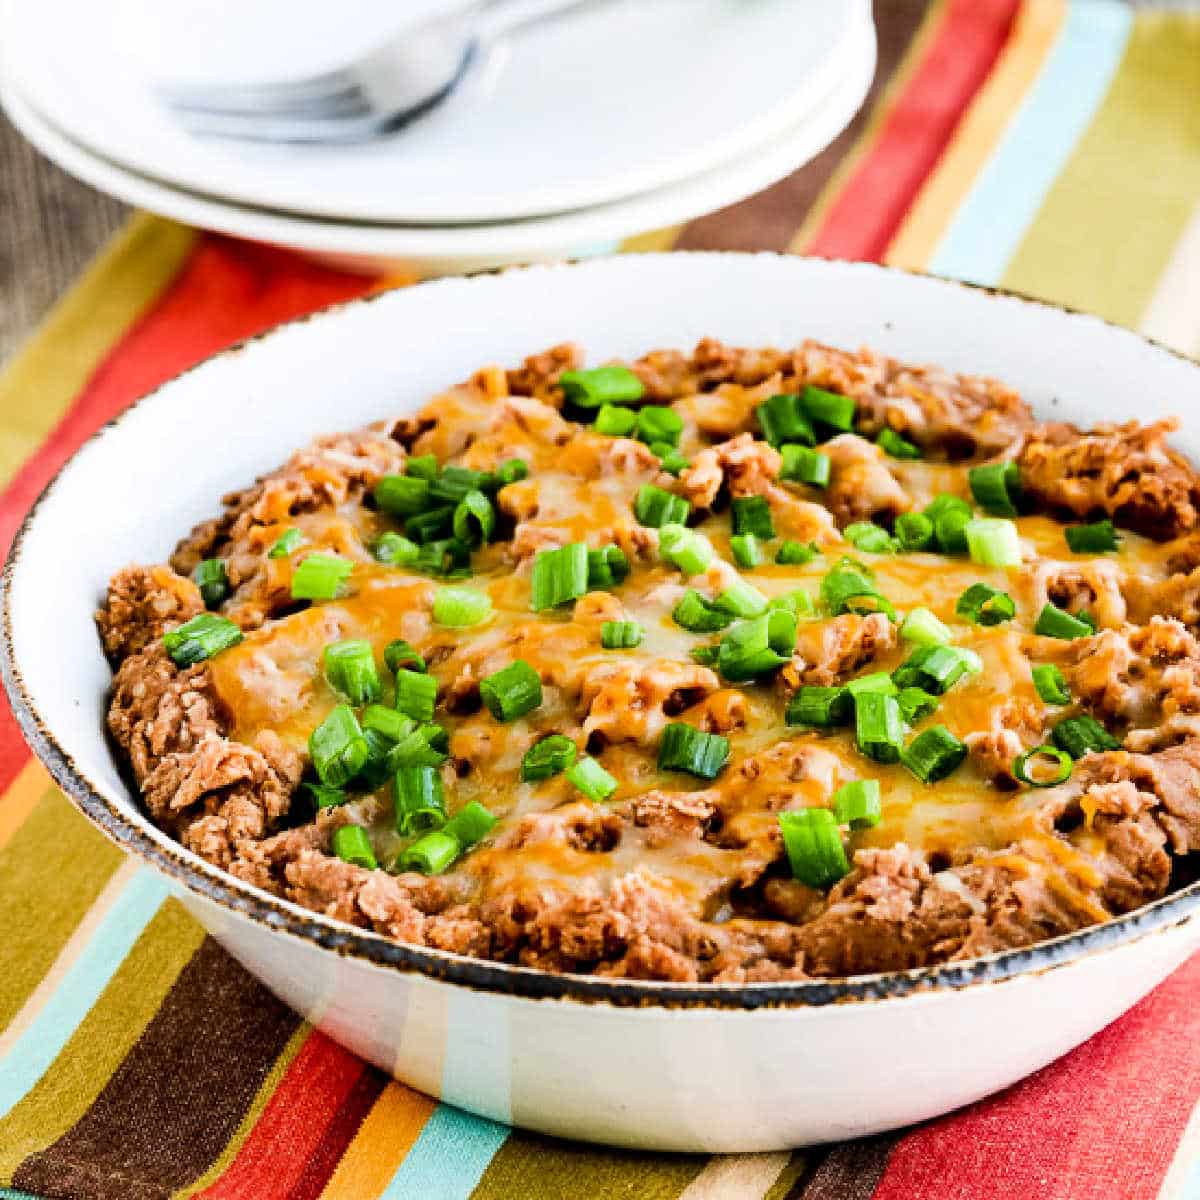 Square image of Instant Pot Refried Beans shown in serving bowl.